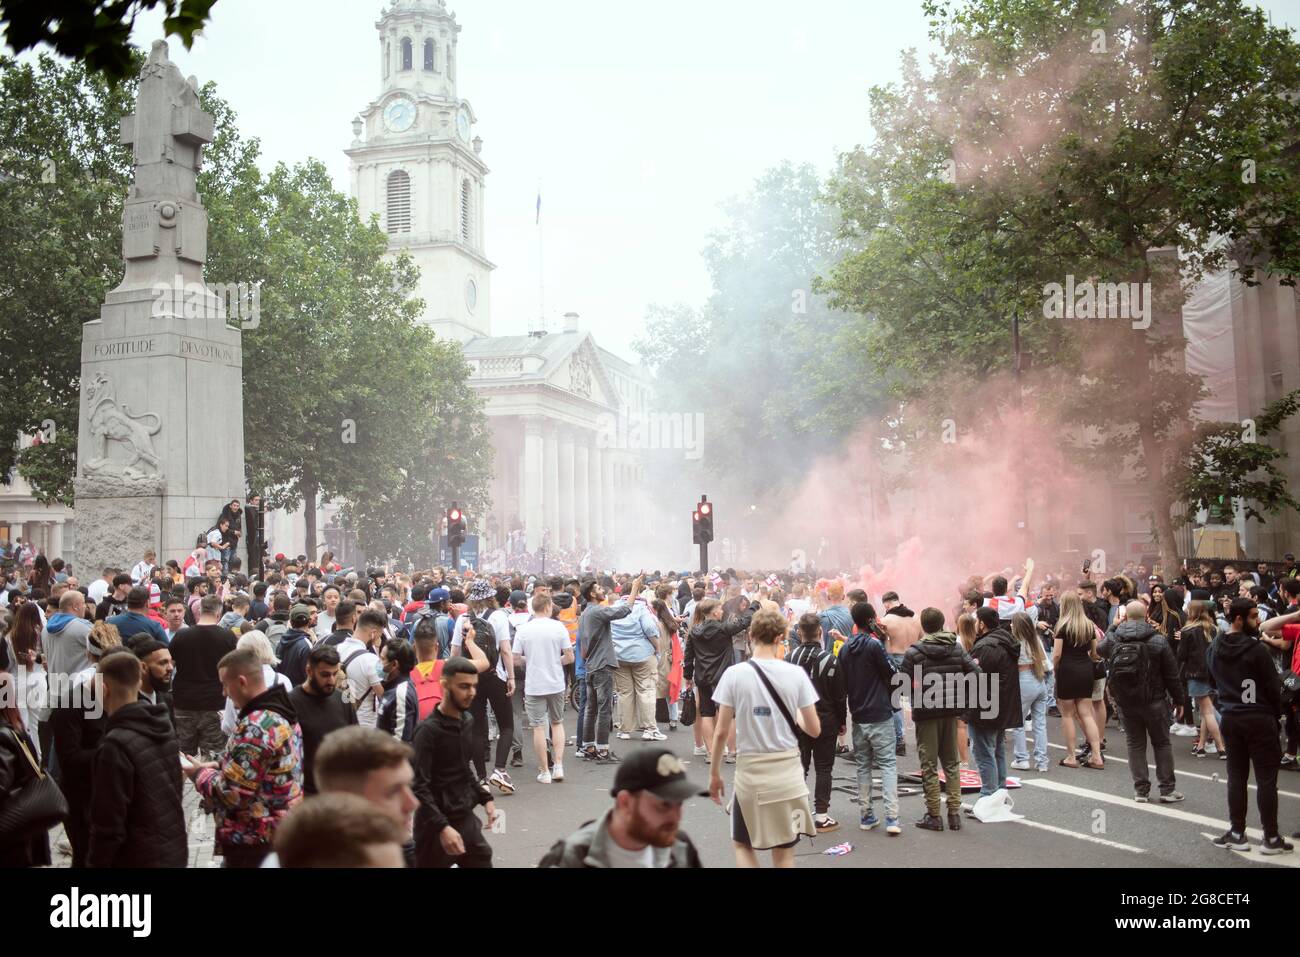 Supporters gathering just before the Euro 2020 Final England vs. Italy. Trafalgar Square, London, UK. 11 July, 2021 Stock Photo